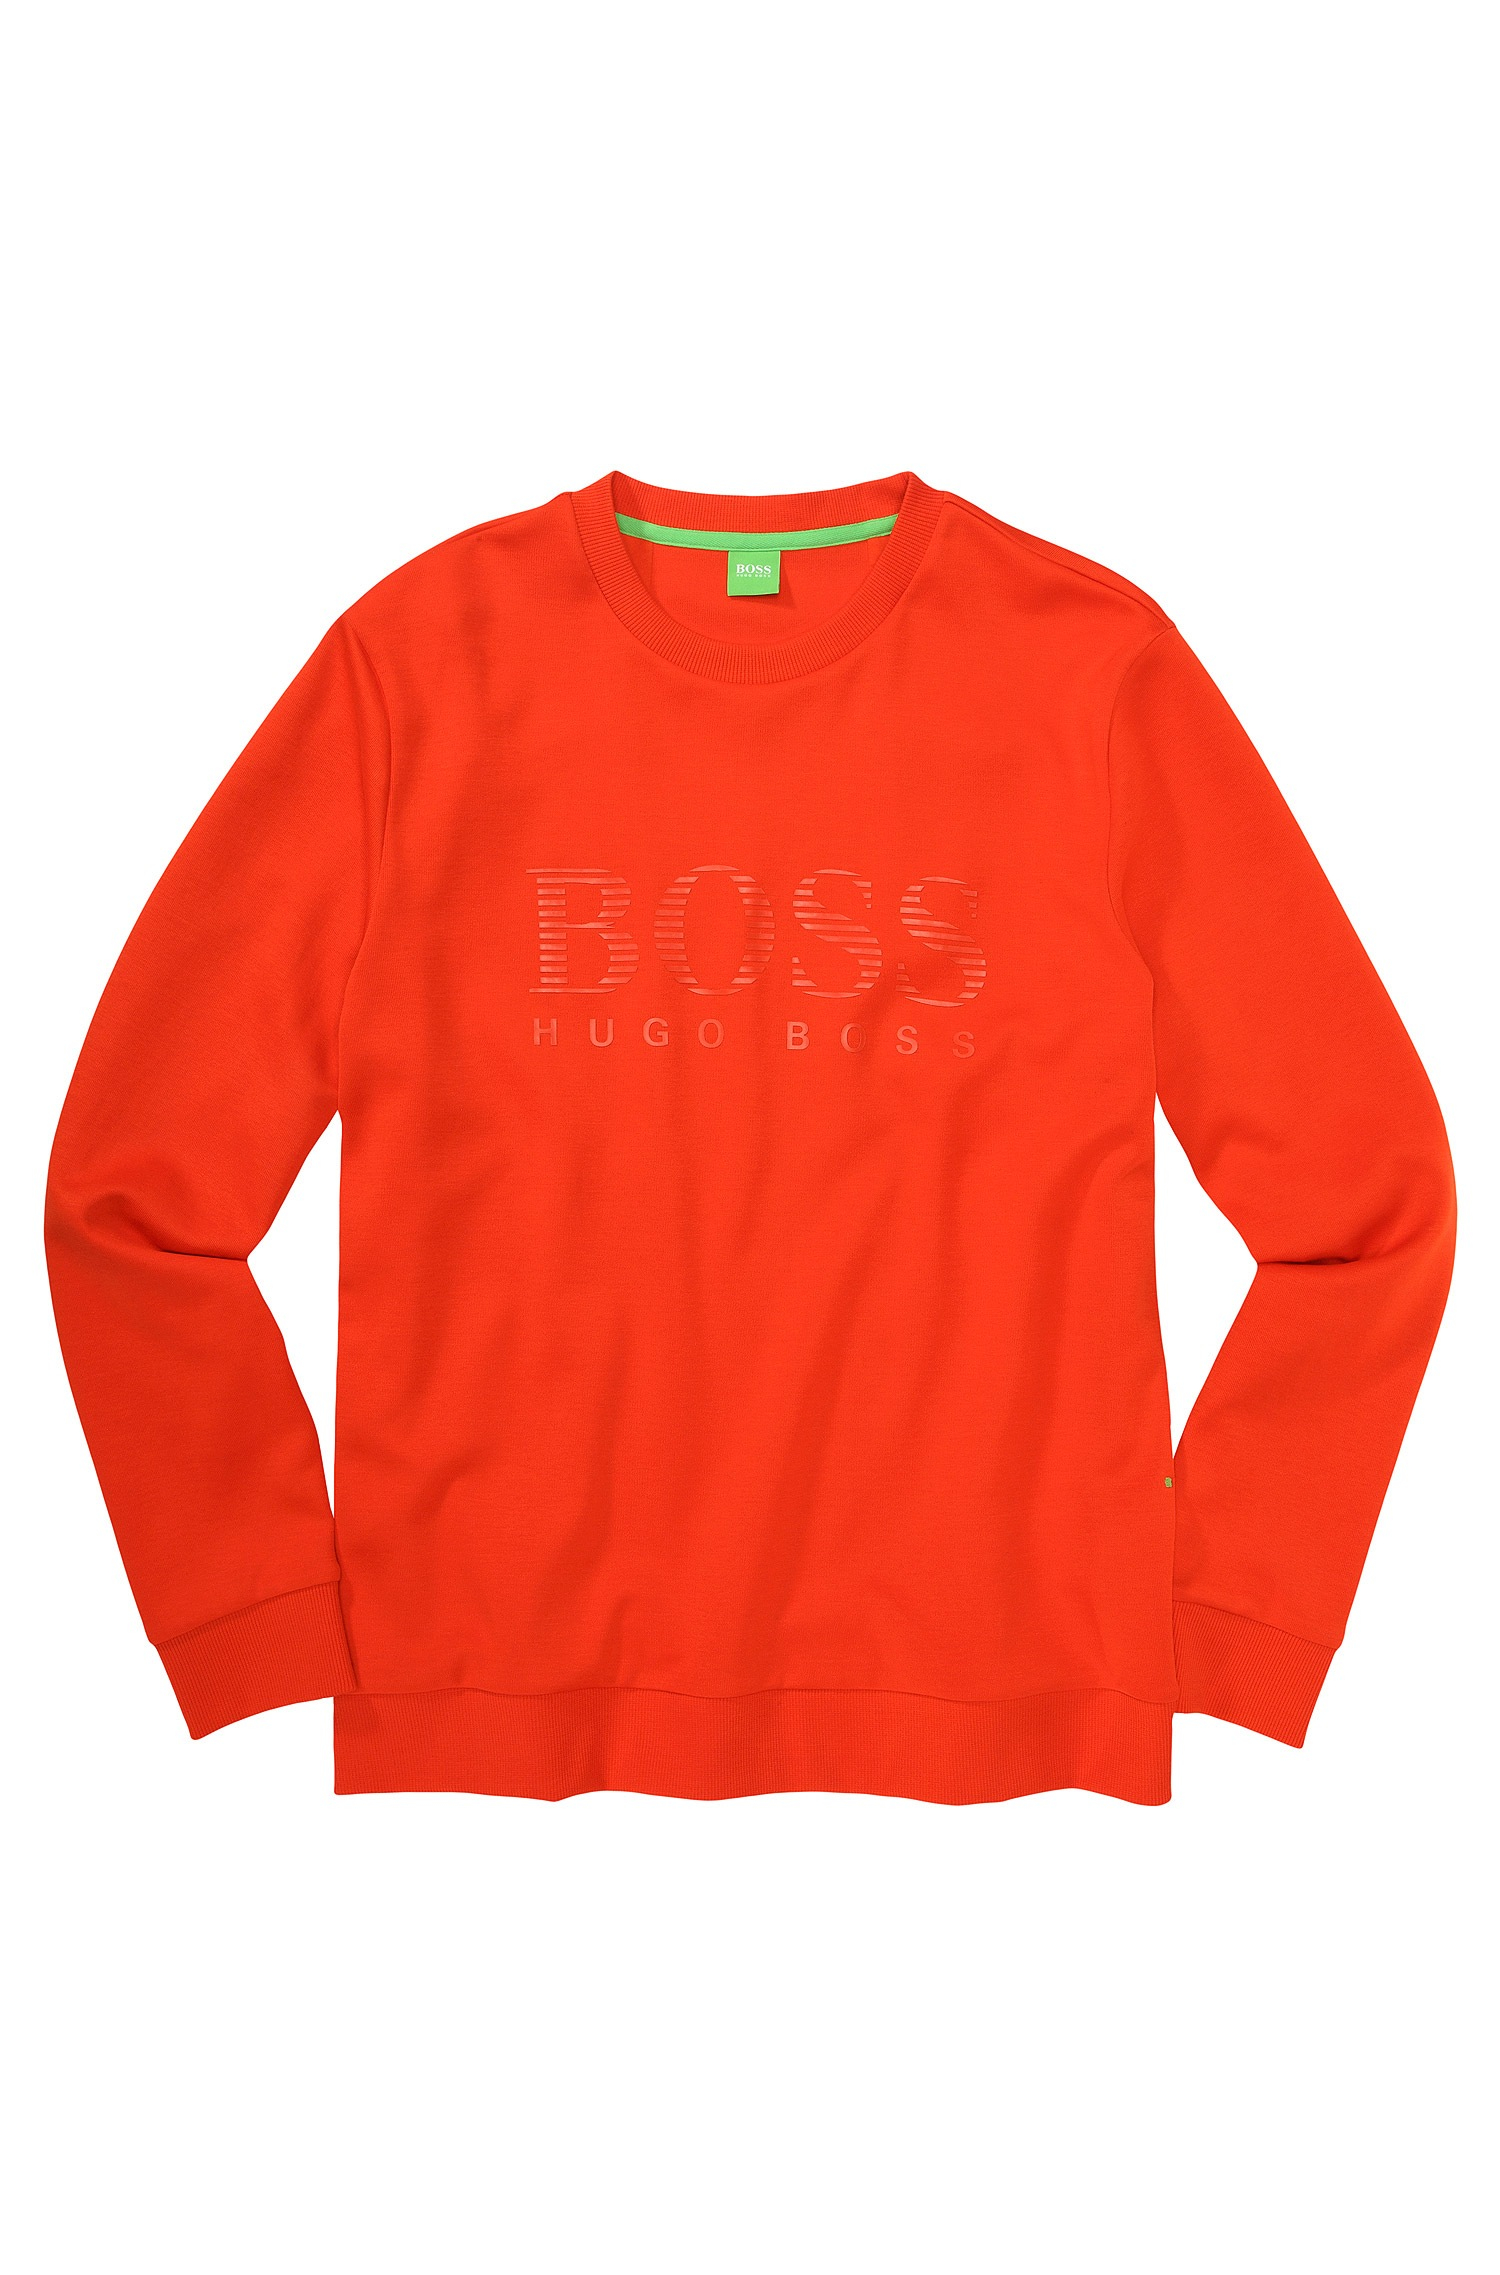 boss green salbo sweatshirt Cheaper Than Retail Price> Buy Clothing, Accessories and products for & men -